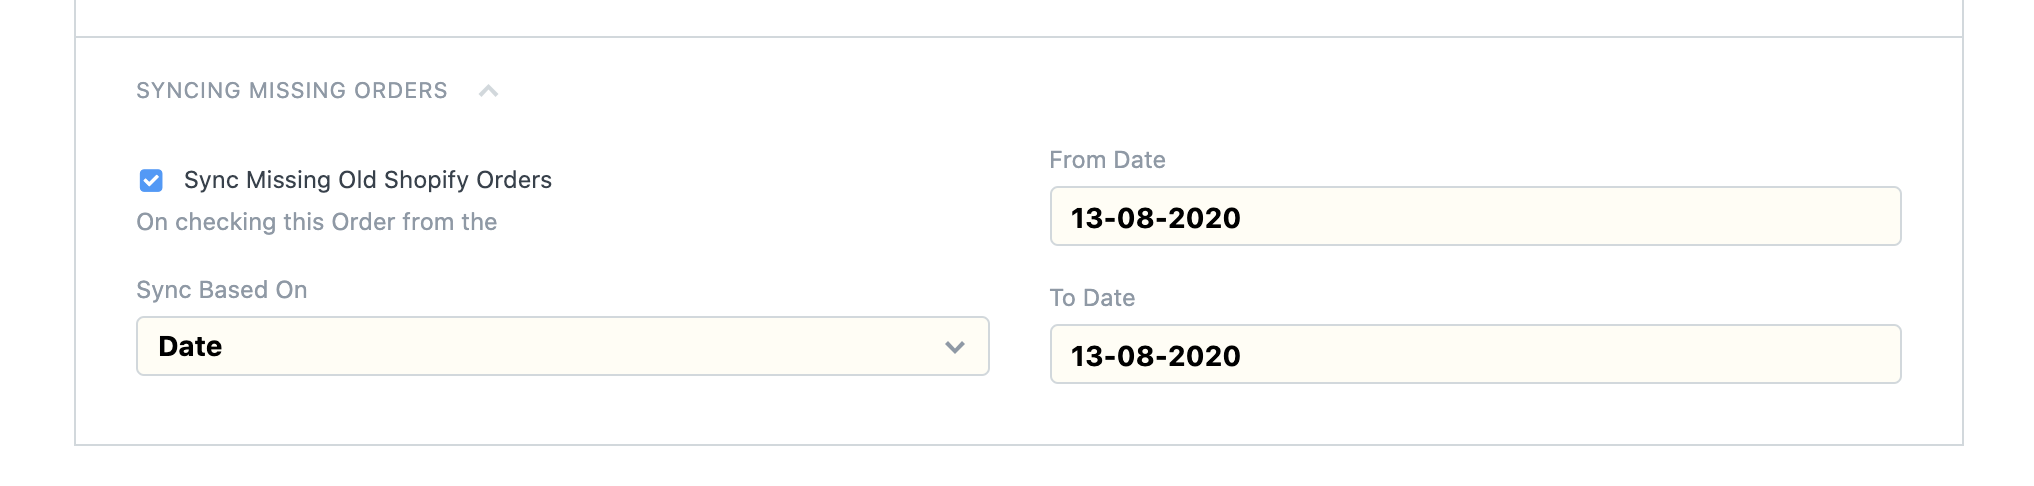 Sync Order By Date